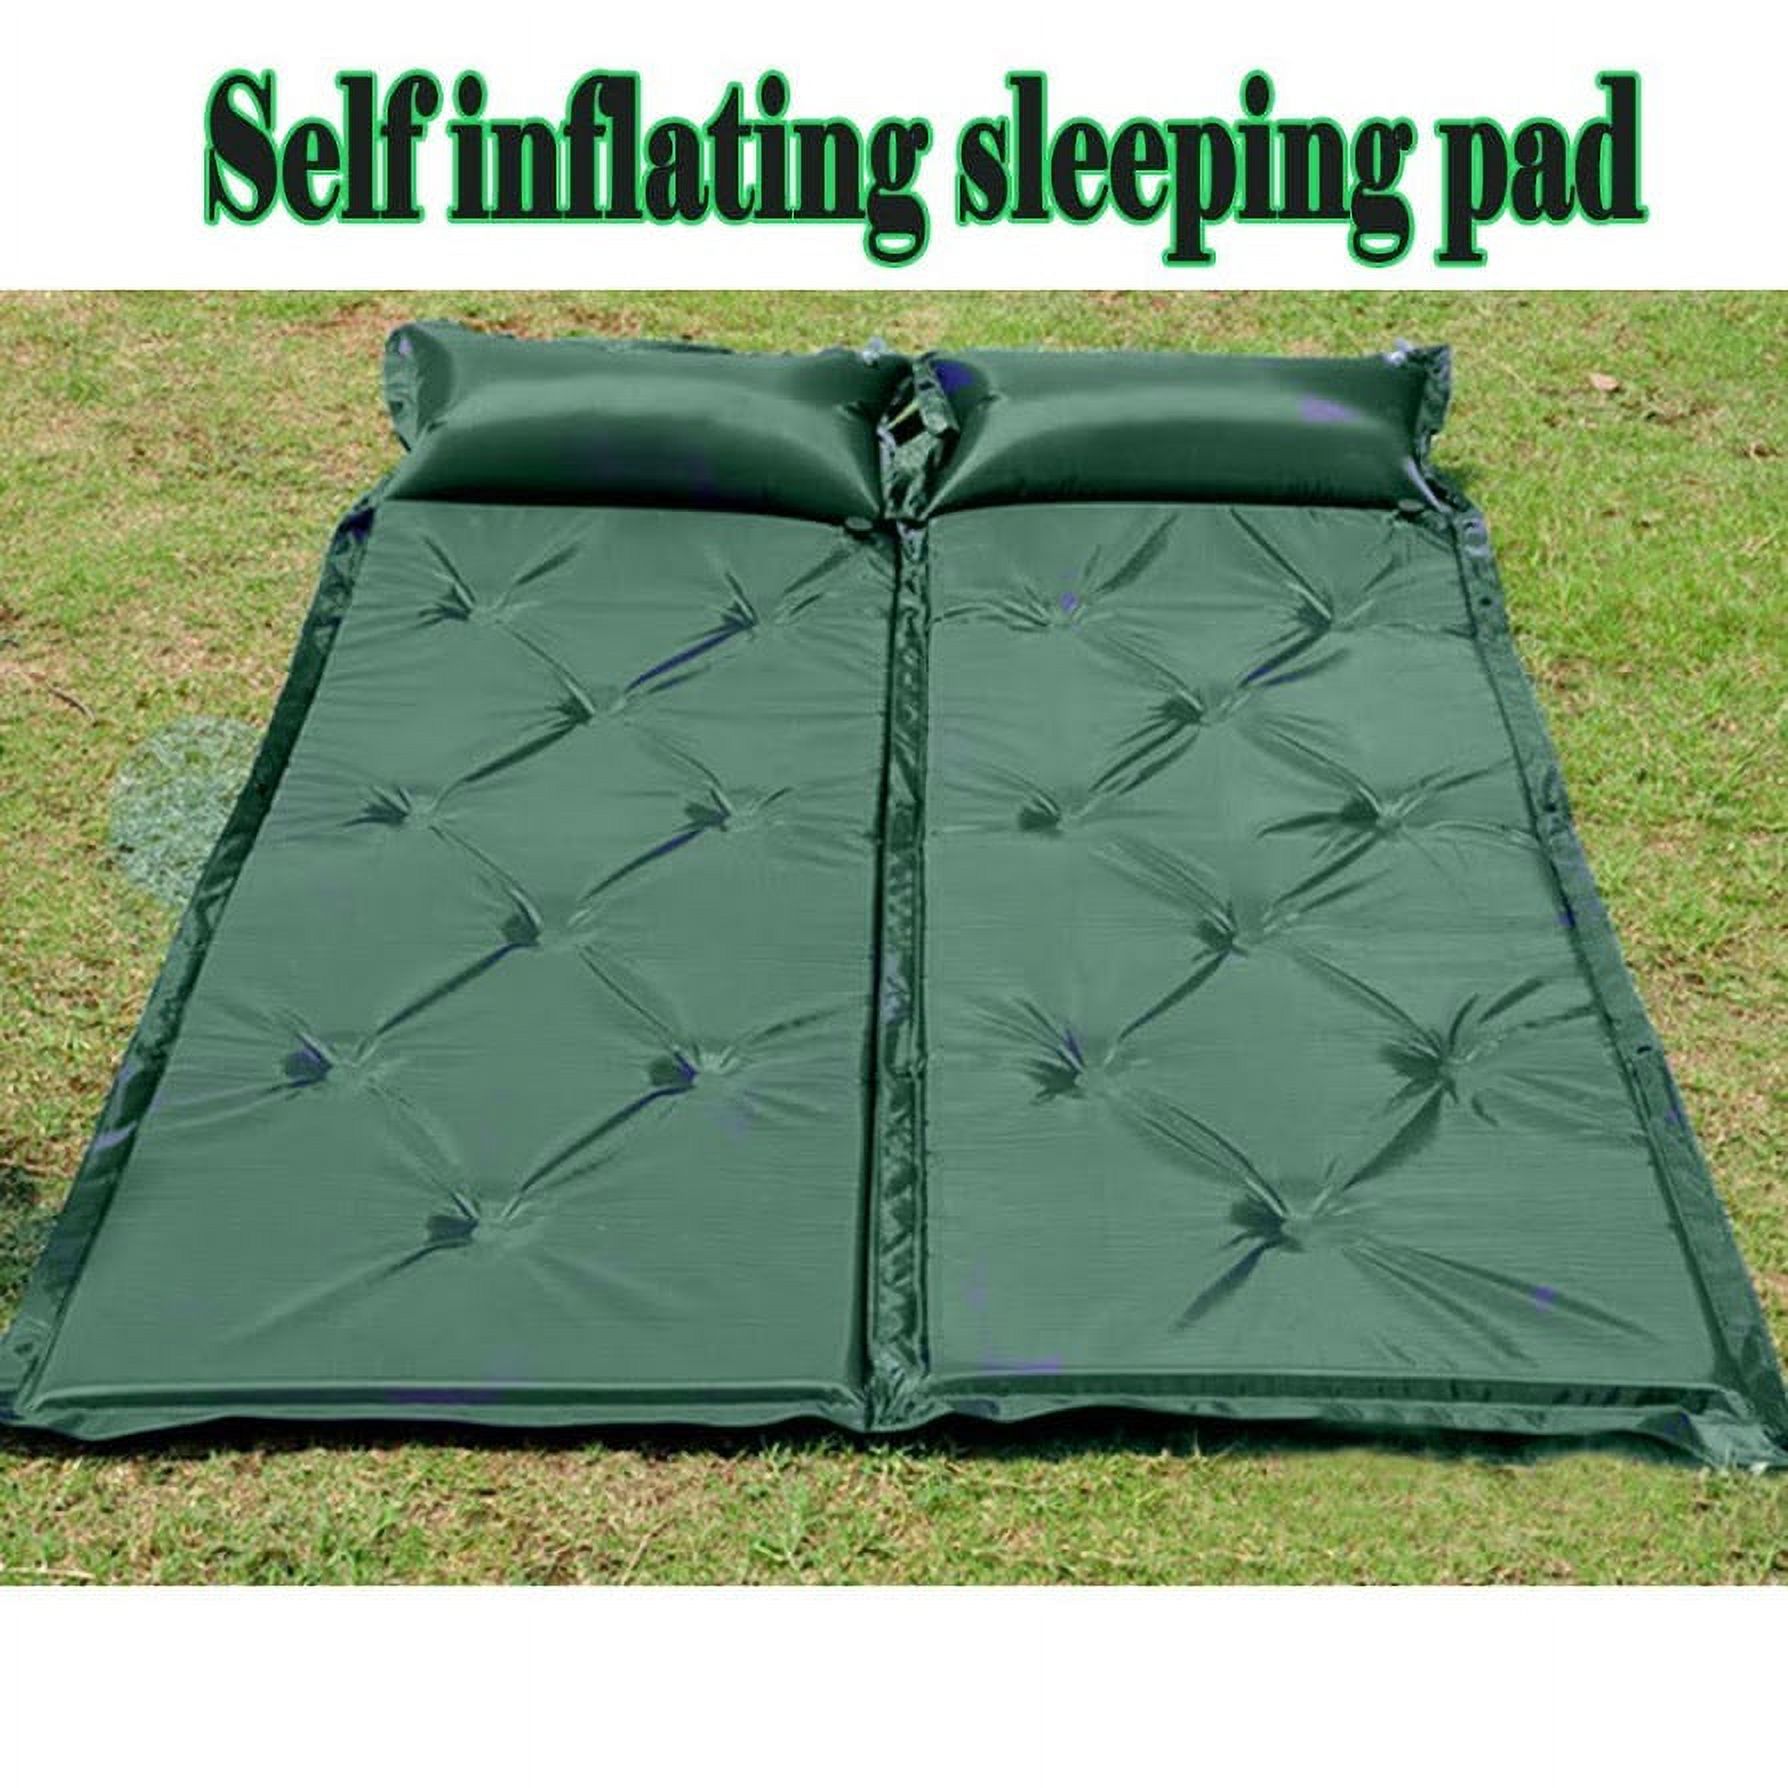 Self Inflating Sleeping Pad Camping Pad Connectable Waterproof Camping matches Designed for Tent Green - image 5 of 6